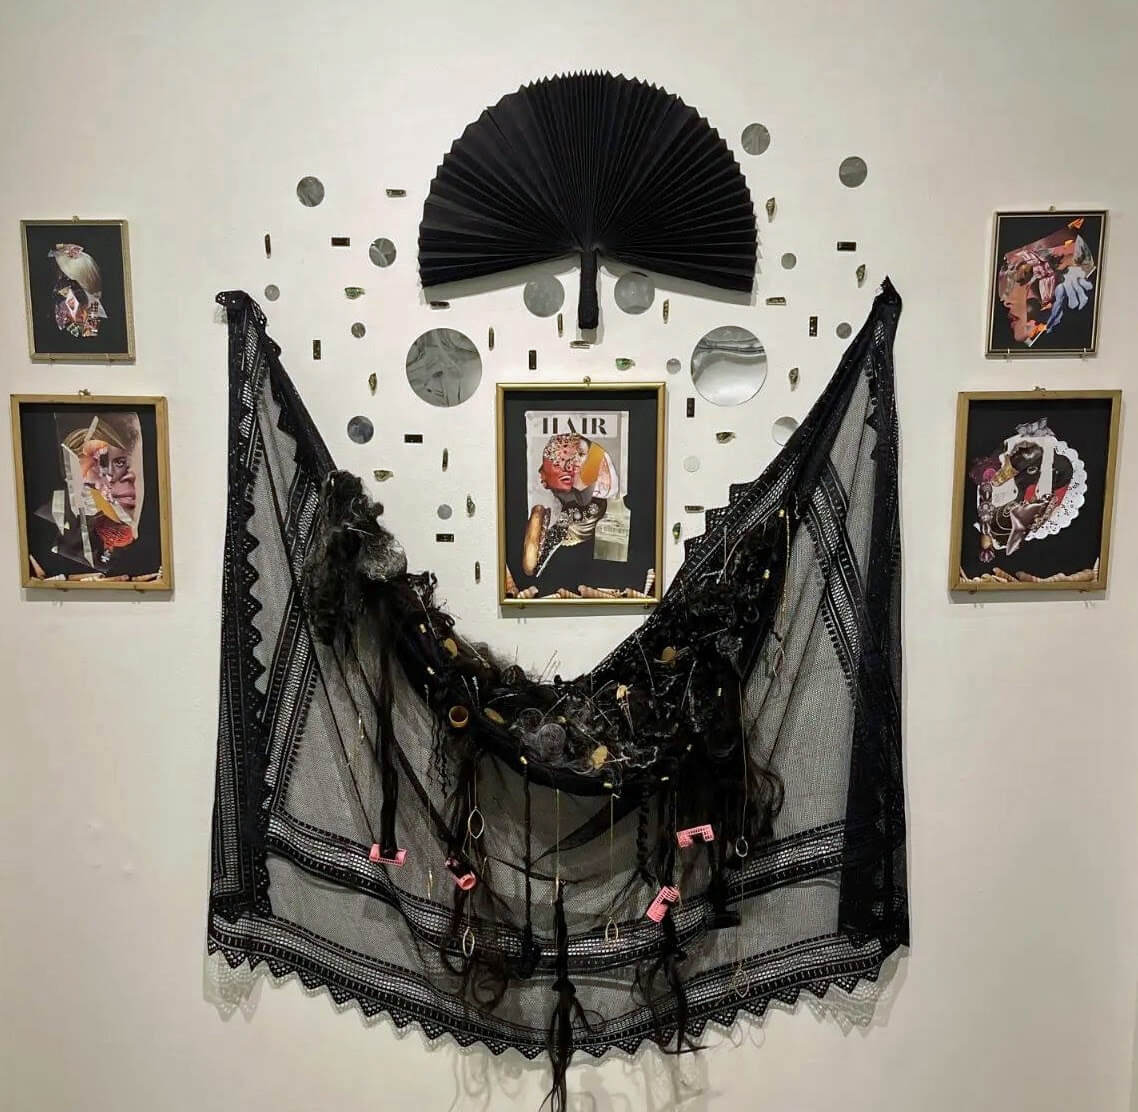 Artwork from Vanezza Cruz's new collection, Vanidades II: Sin nombre pero con memorias (English: Vanities II: Without a name but with memories).